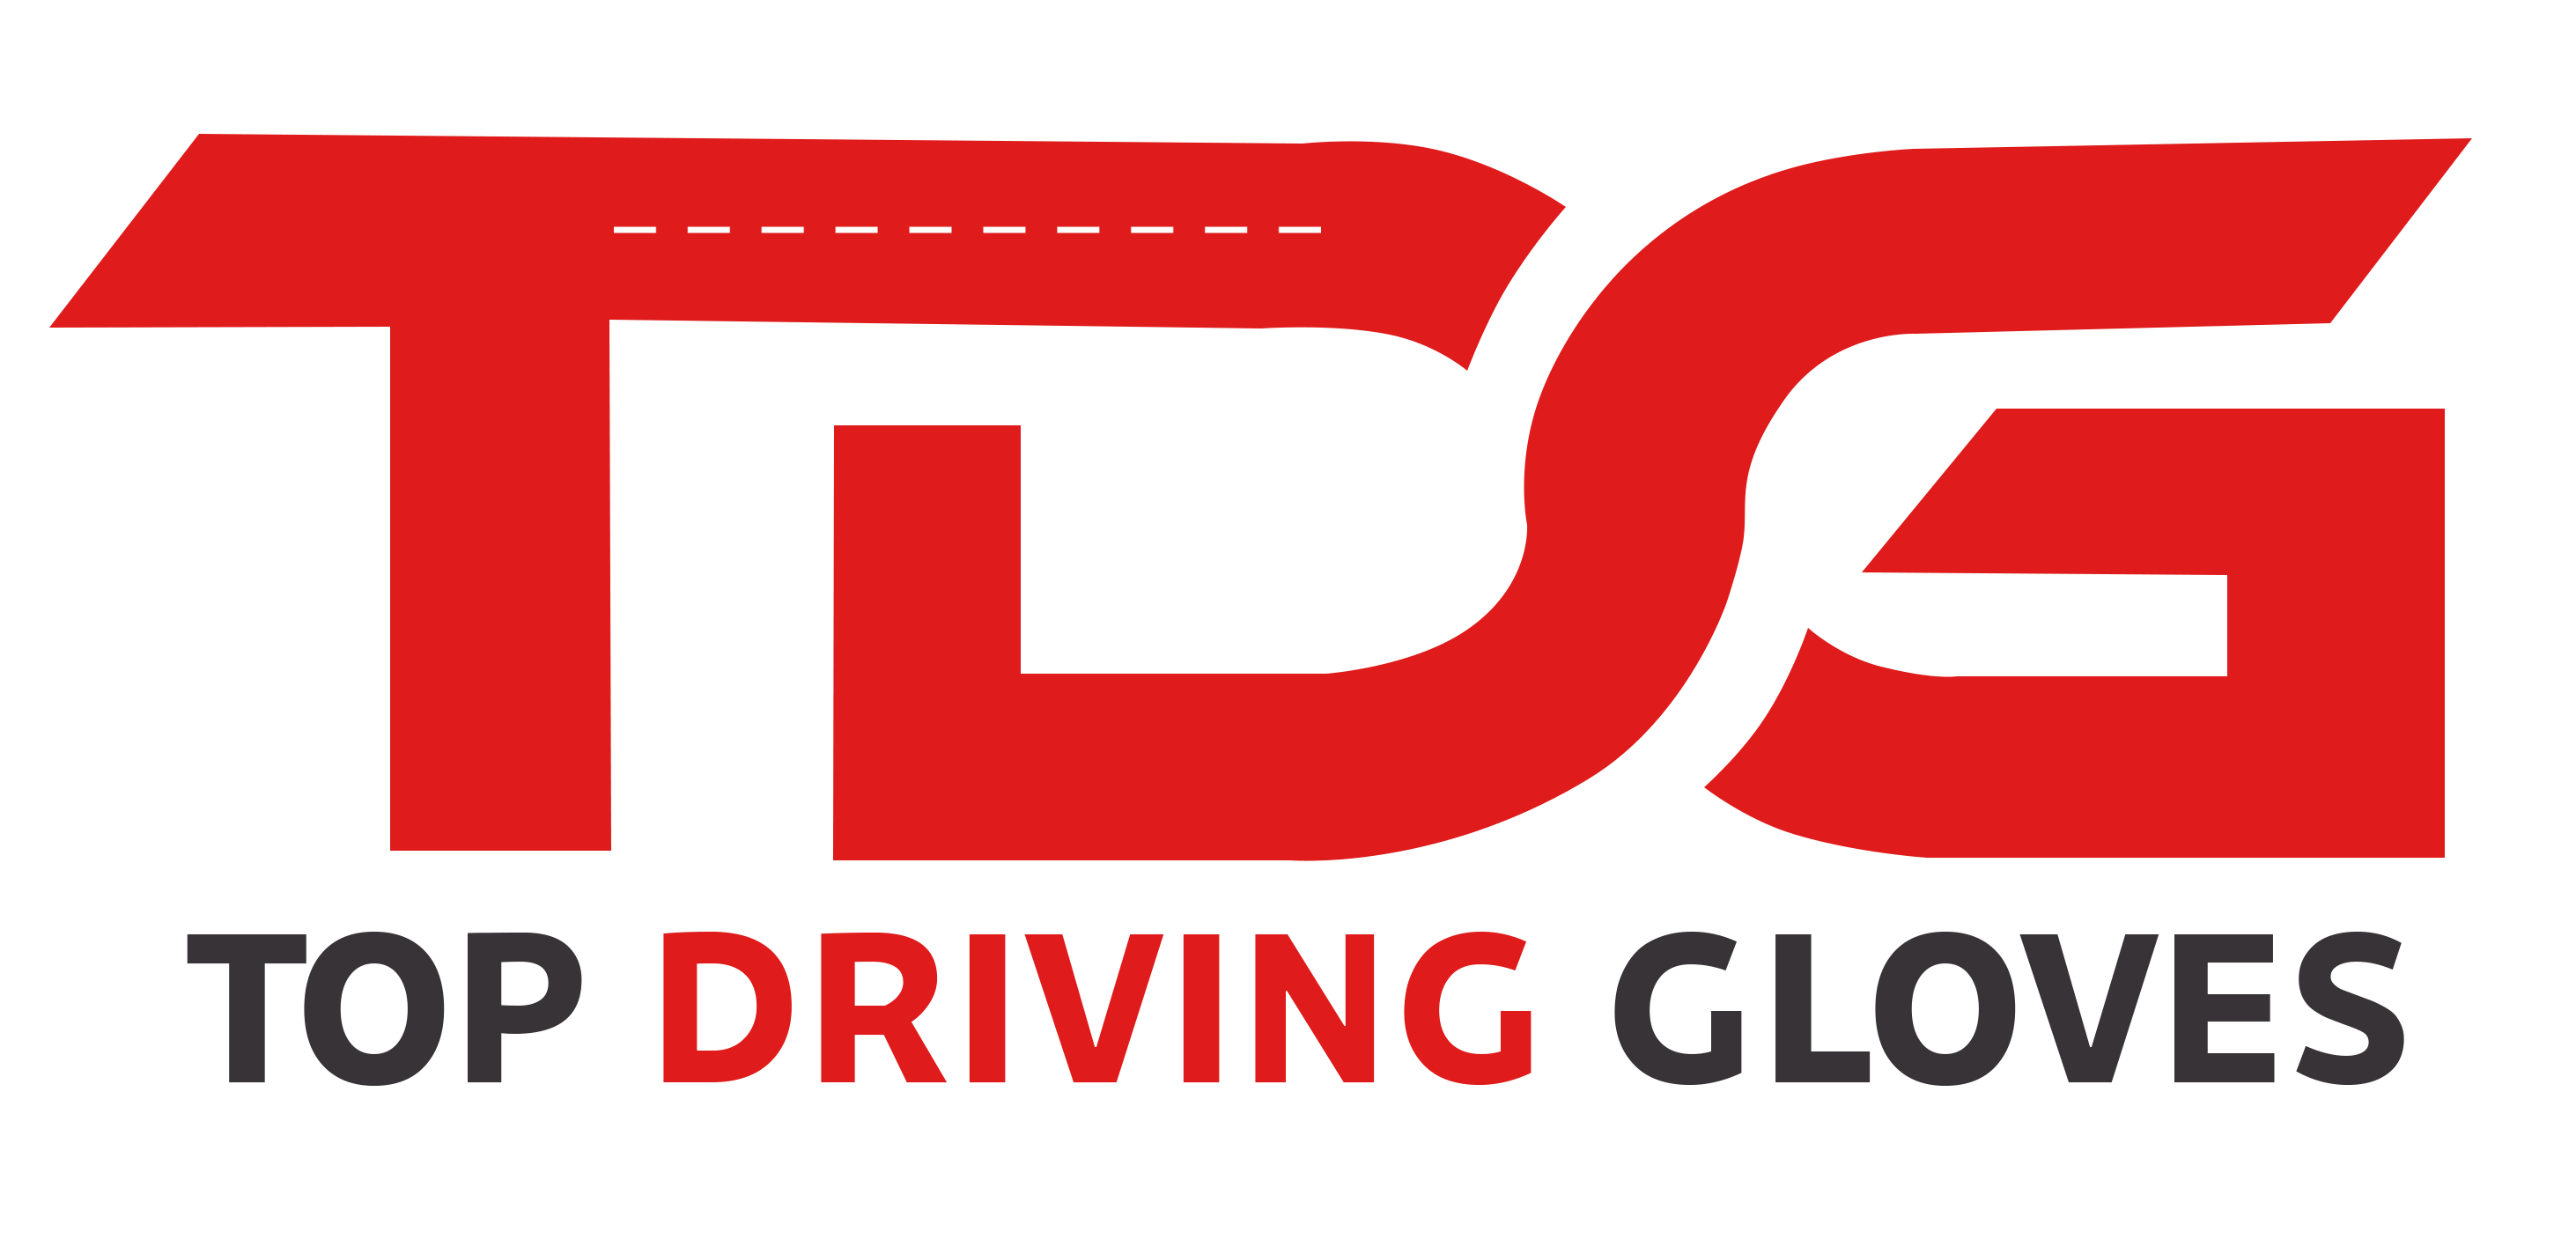 Top Driving Gloves